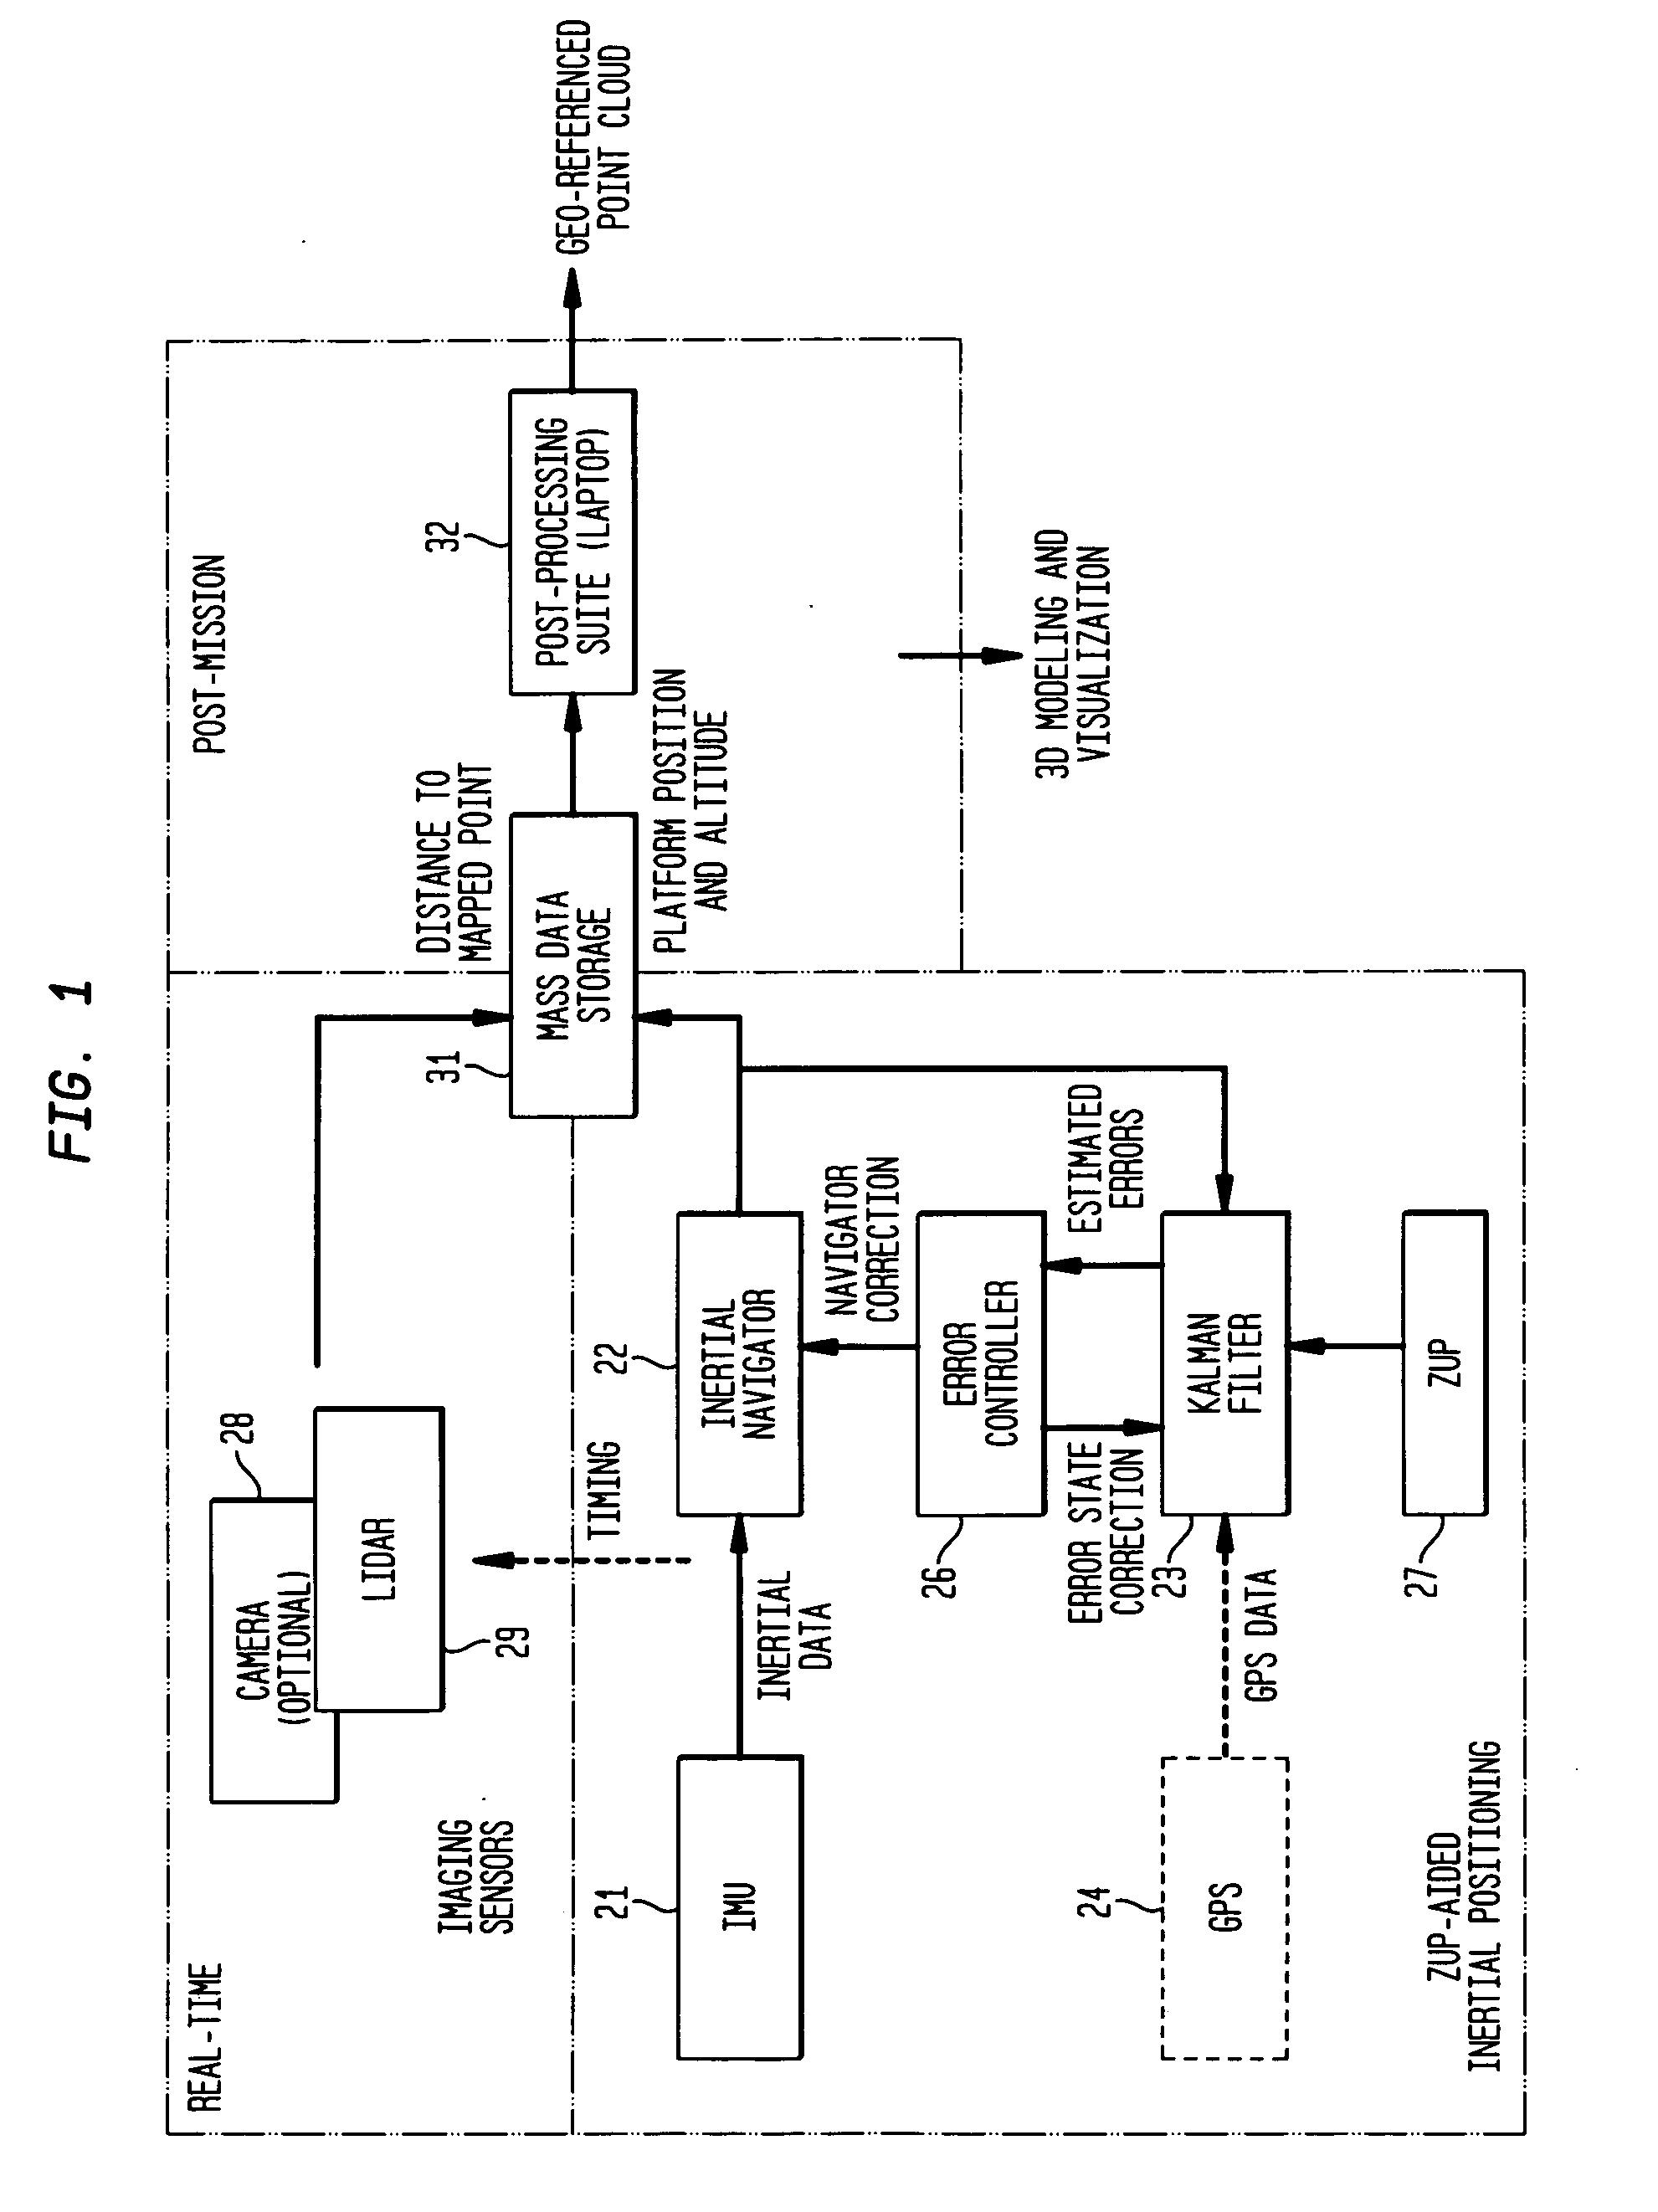 System and method for obtaining georeferenced mapping data